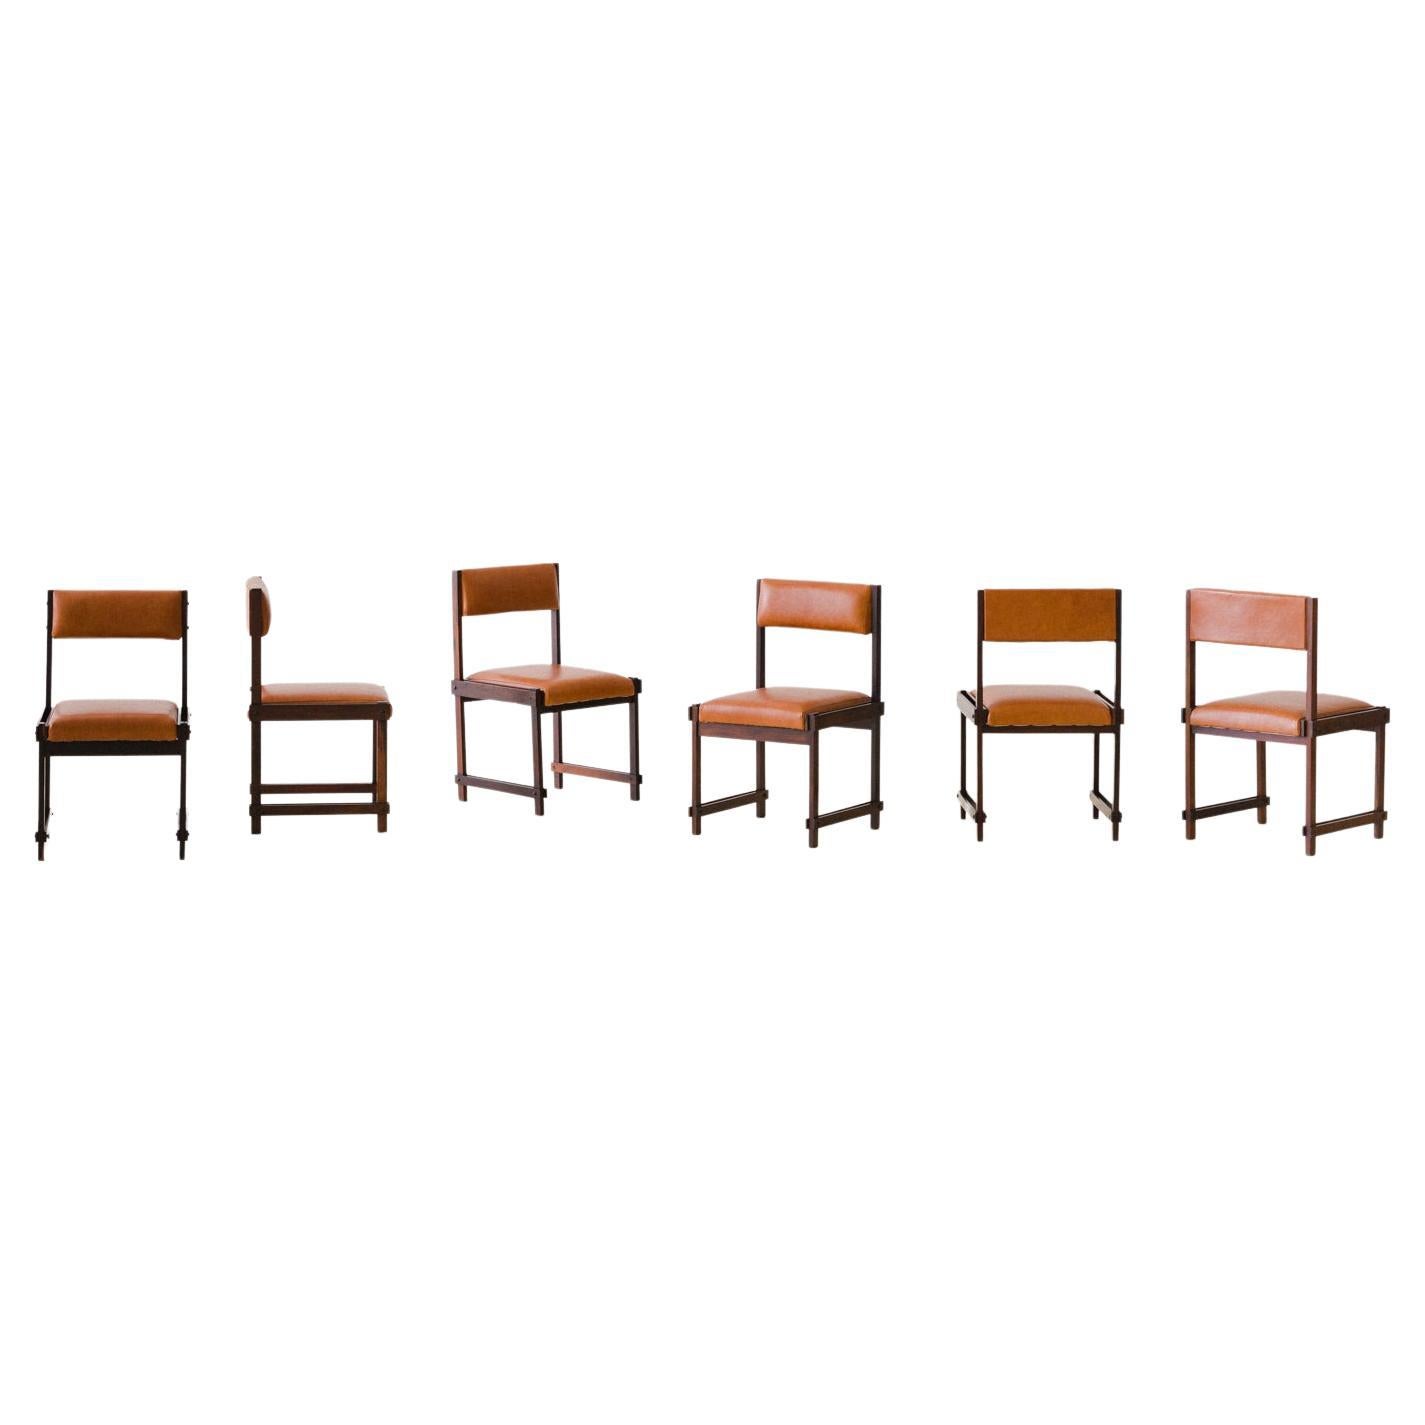 Brazilian Rosewood Dining Chairs by FAI 'Fatima Arquitetura Interiores', 1960s For Sale